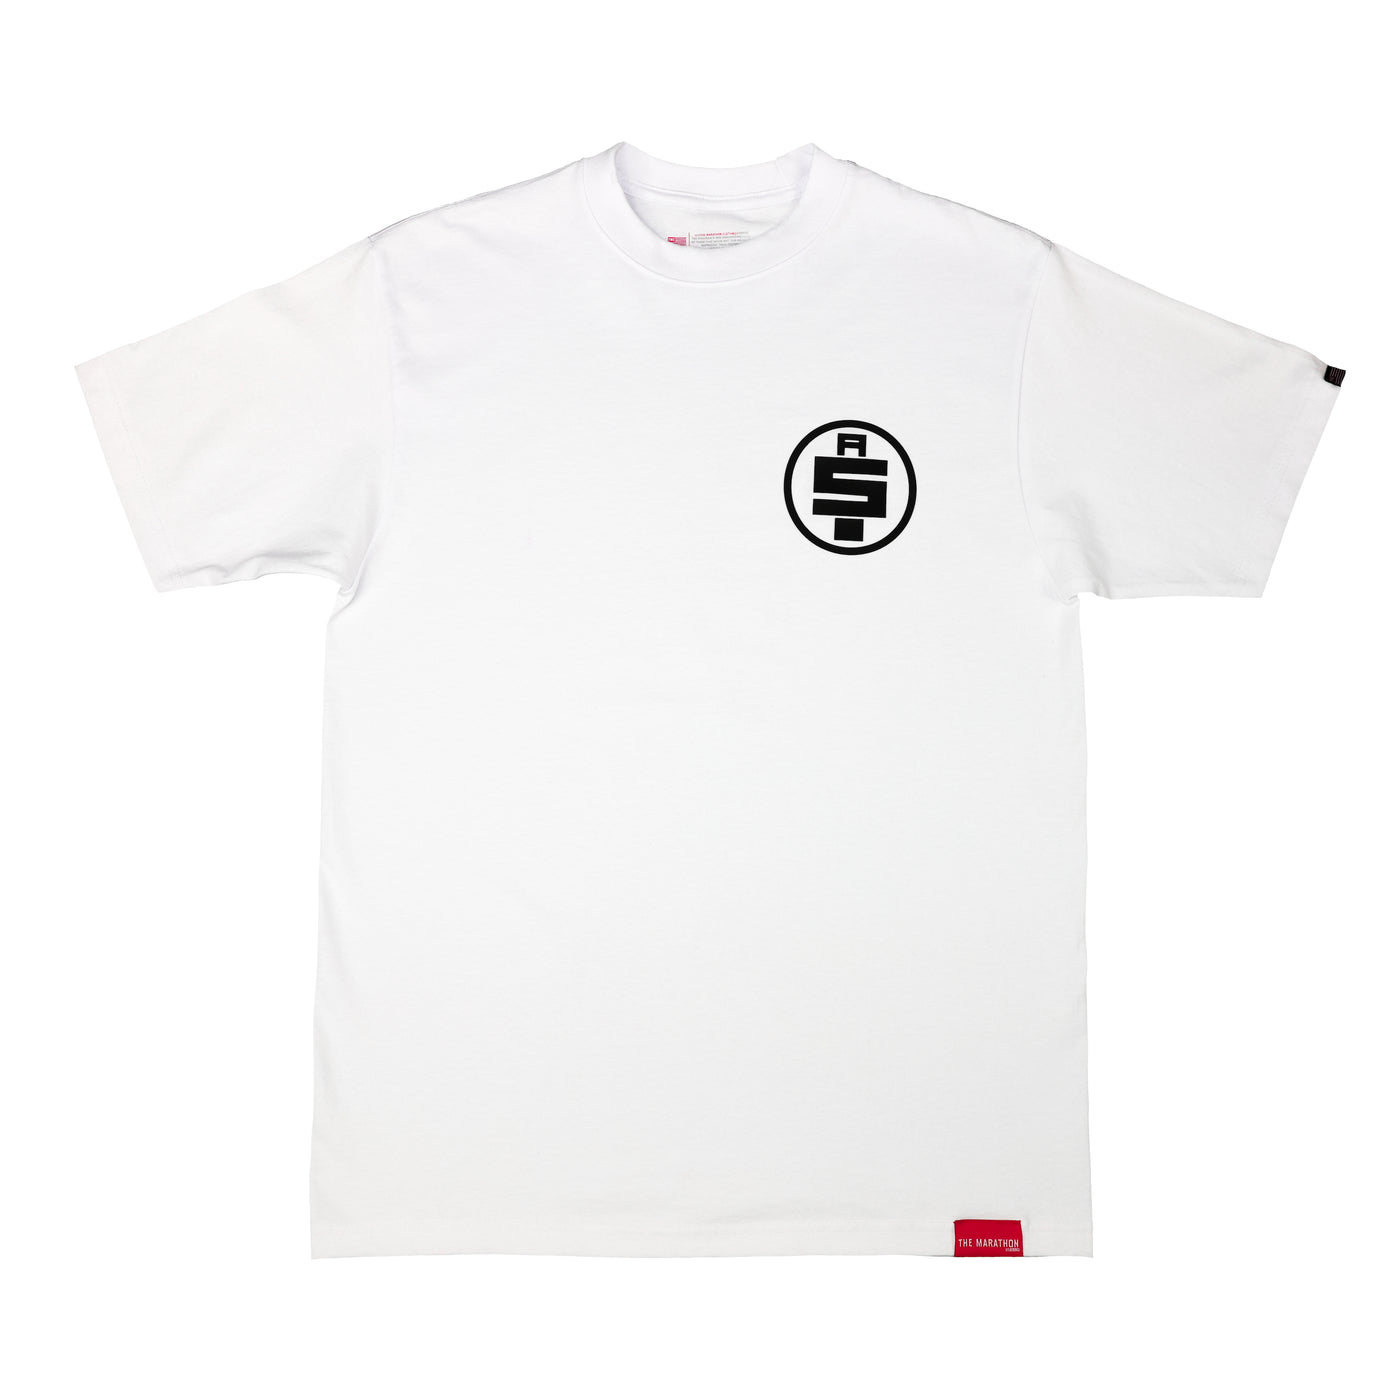 All Money In Limited Edition T-Shirt - White/Black